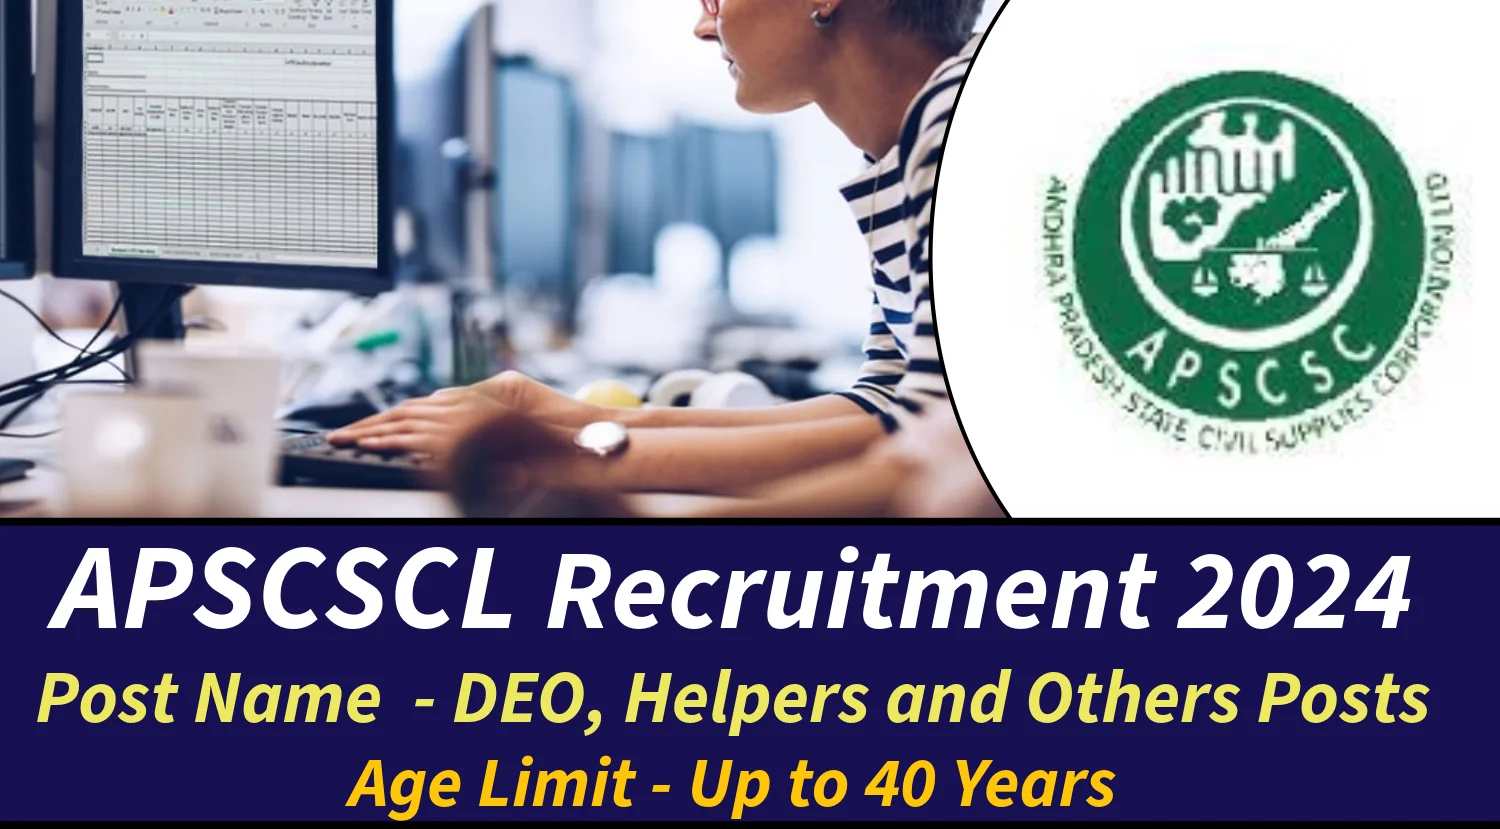 APSCSCL DEO and Helpers Recruitment 2024 Notification Out for 300 Posts